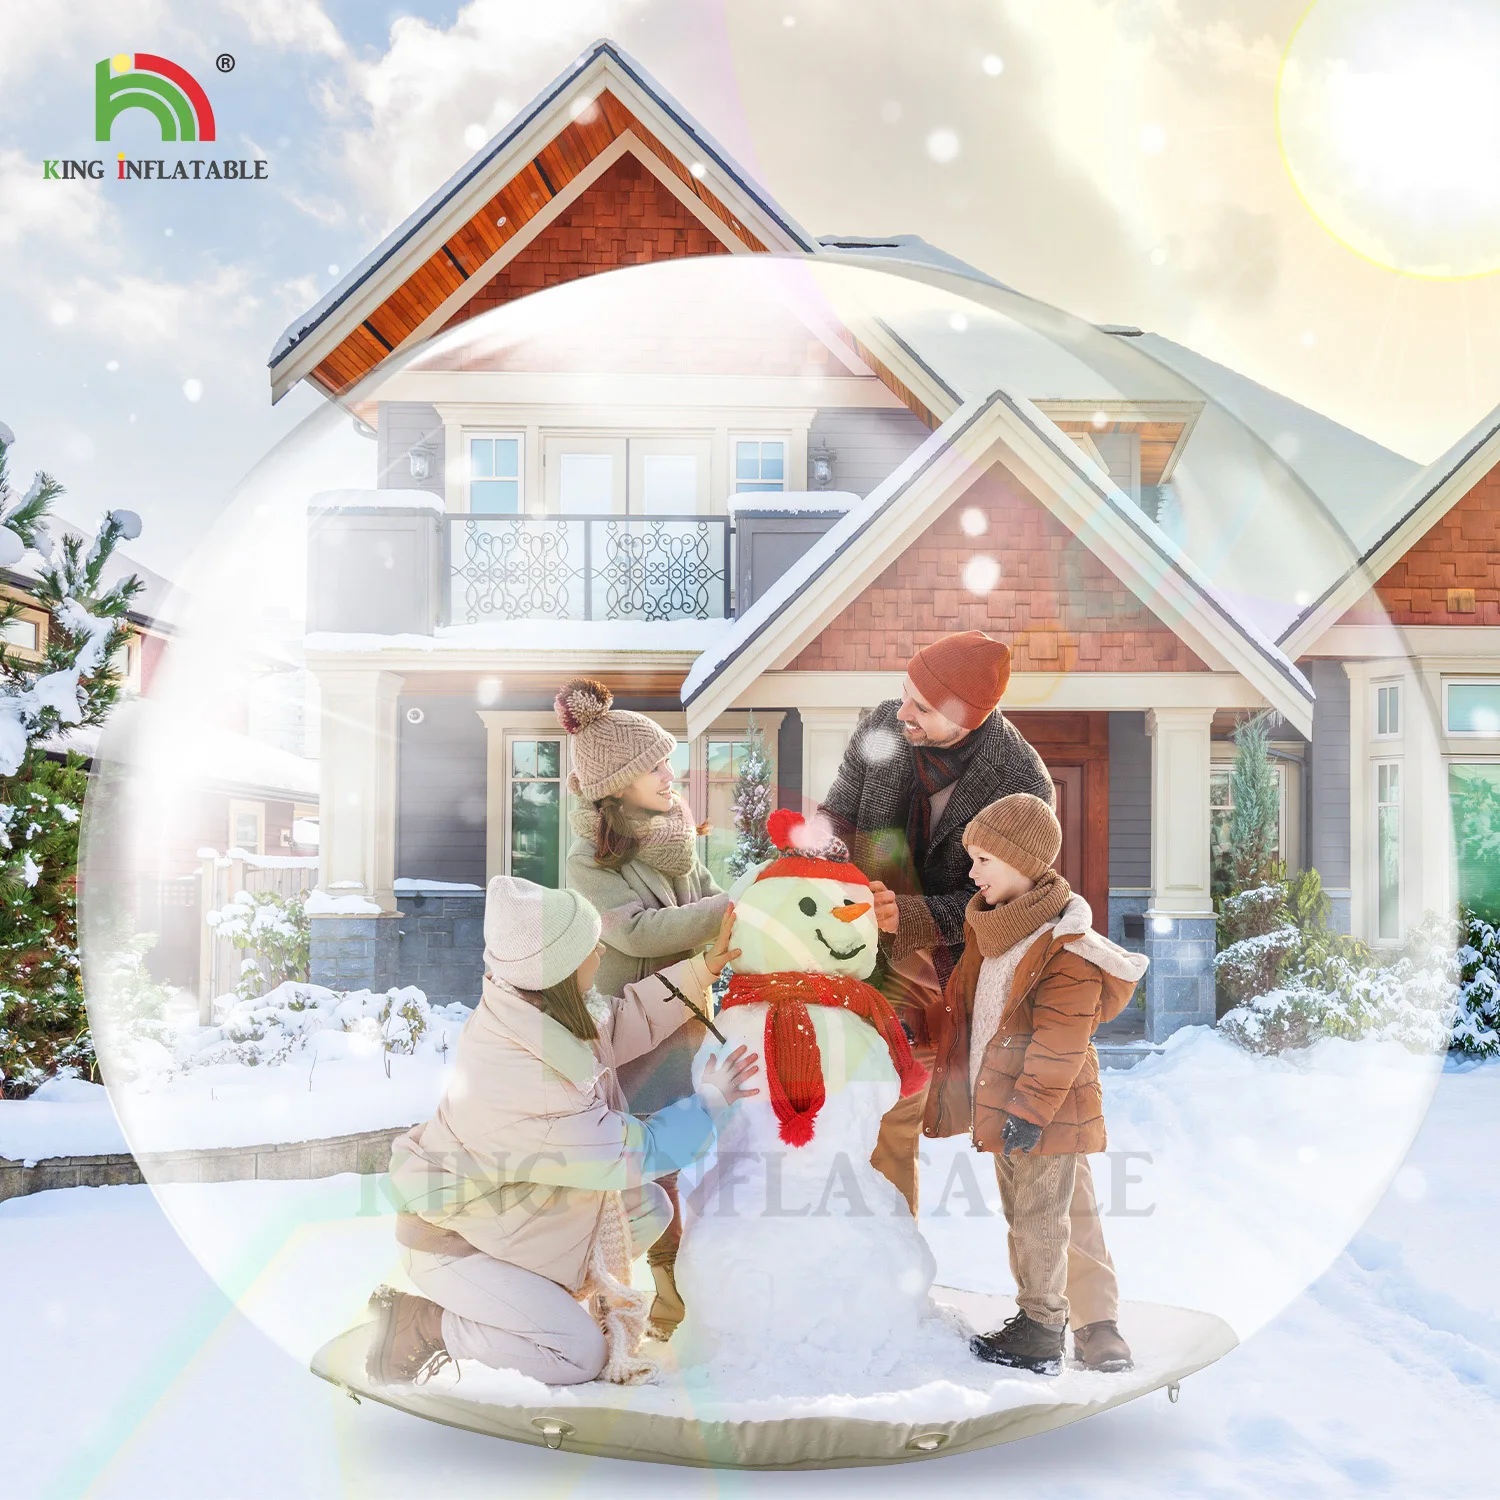 10ft/3m PVC Transparent Bubble Tent Giant Inflatable Snowball Christmas Snow Globe Dome Xmas Outdoor Decoration With Blower ycc365 plus wireless waterproof ip camera speed dome outdoor security wifi camera two ways audio